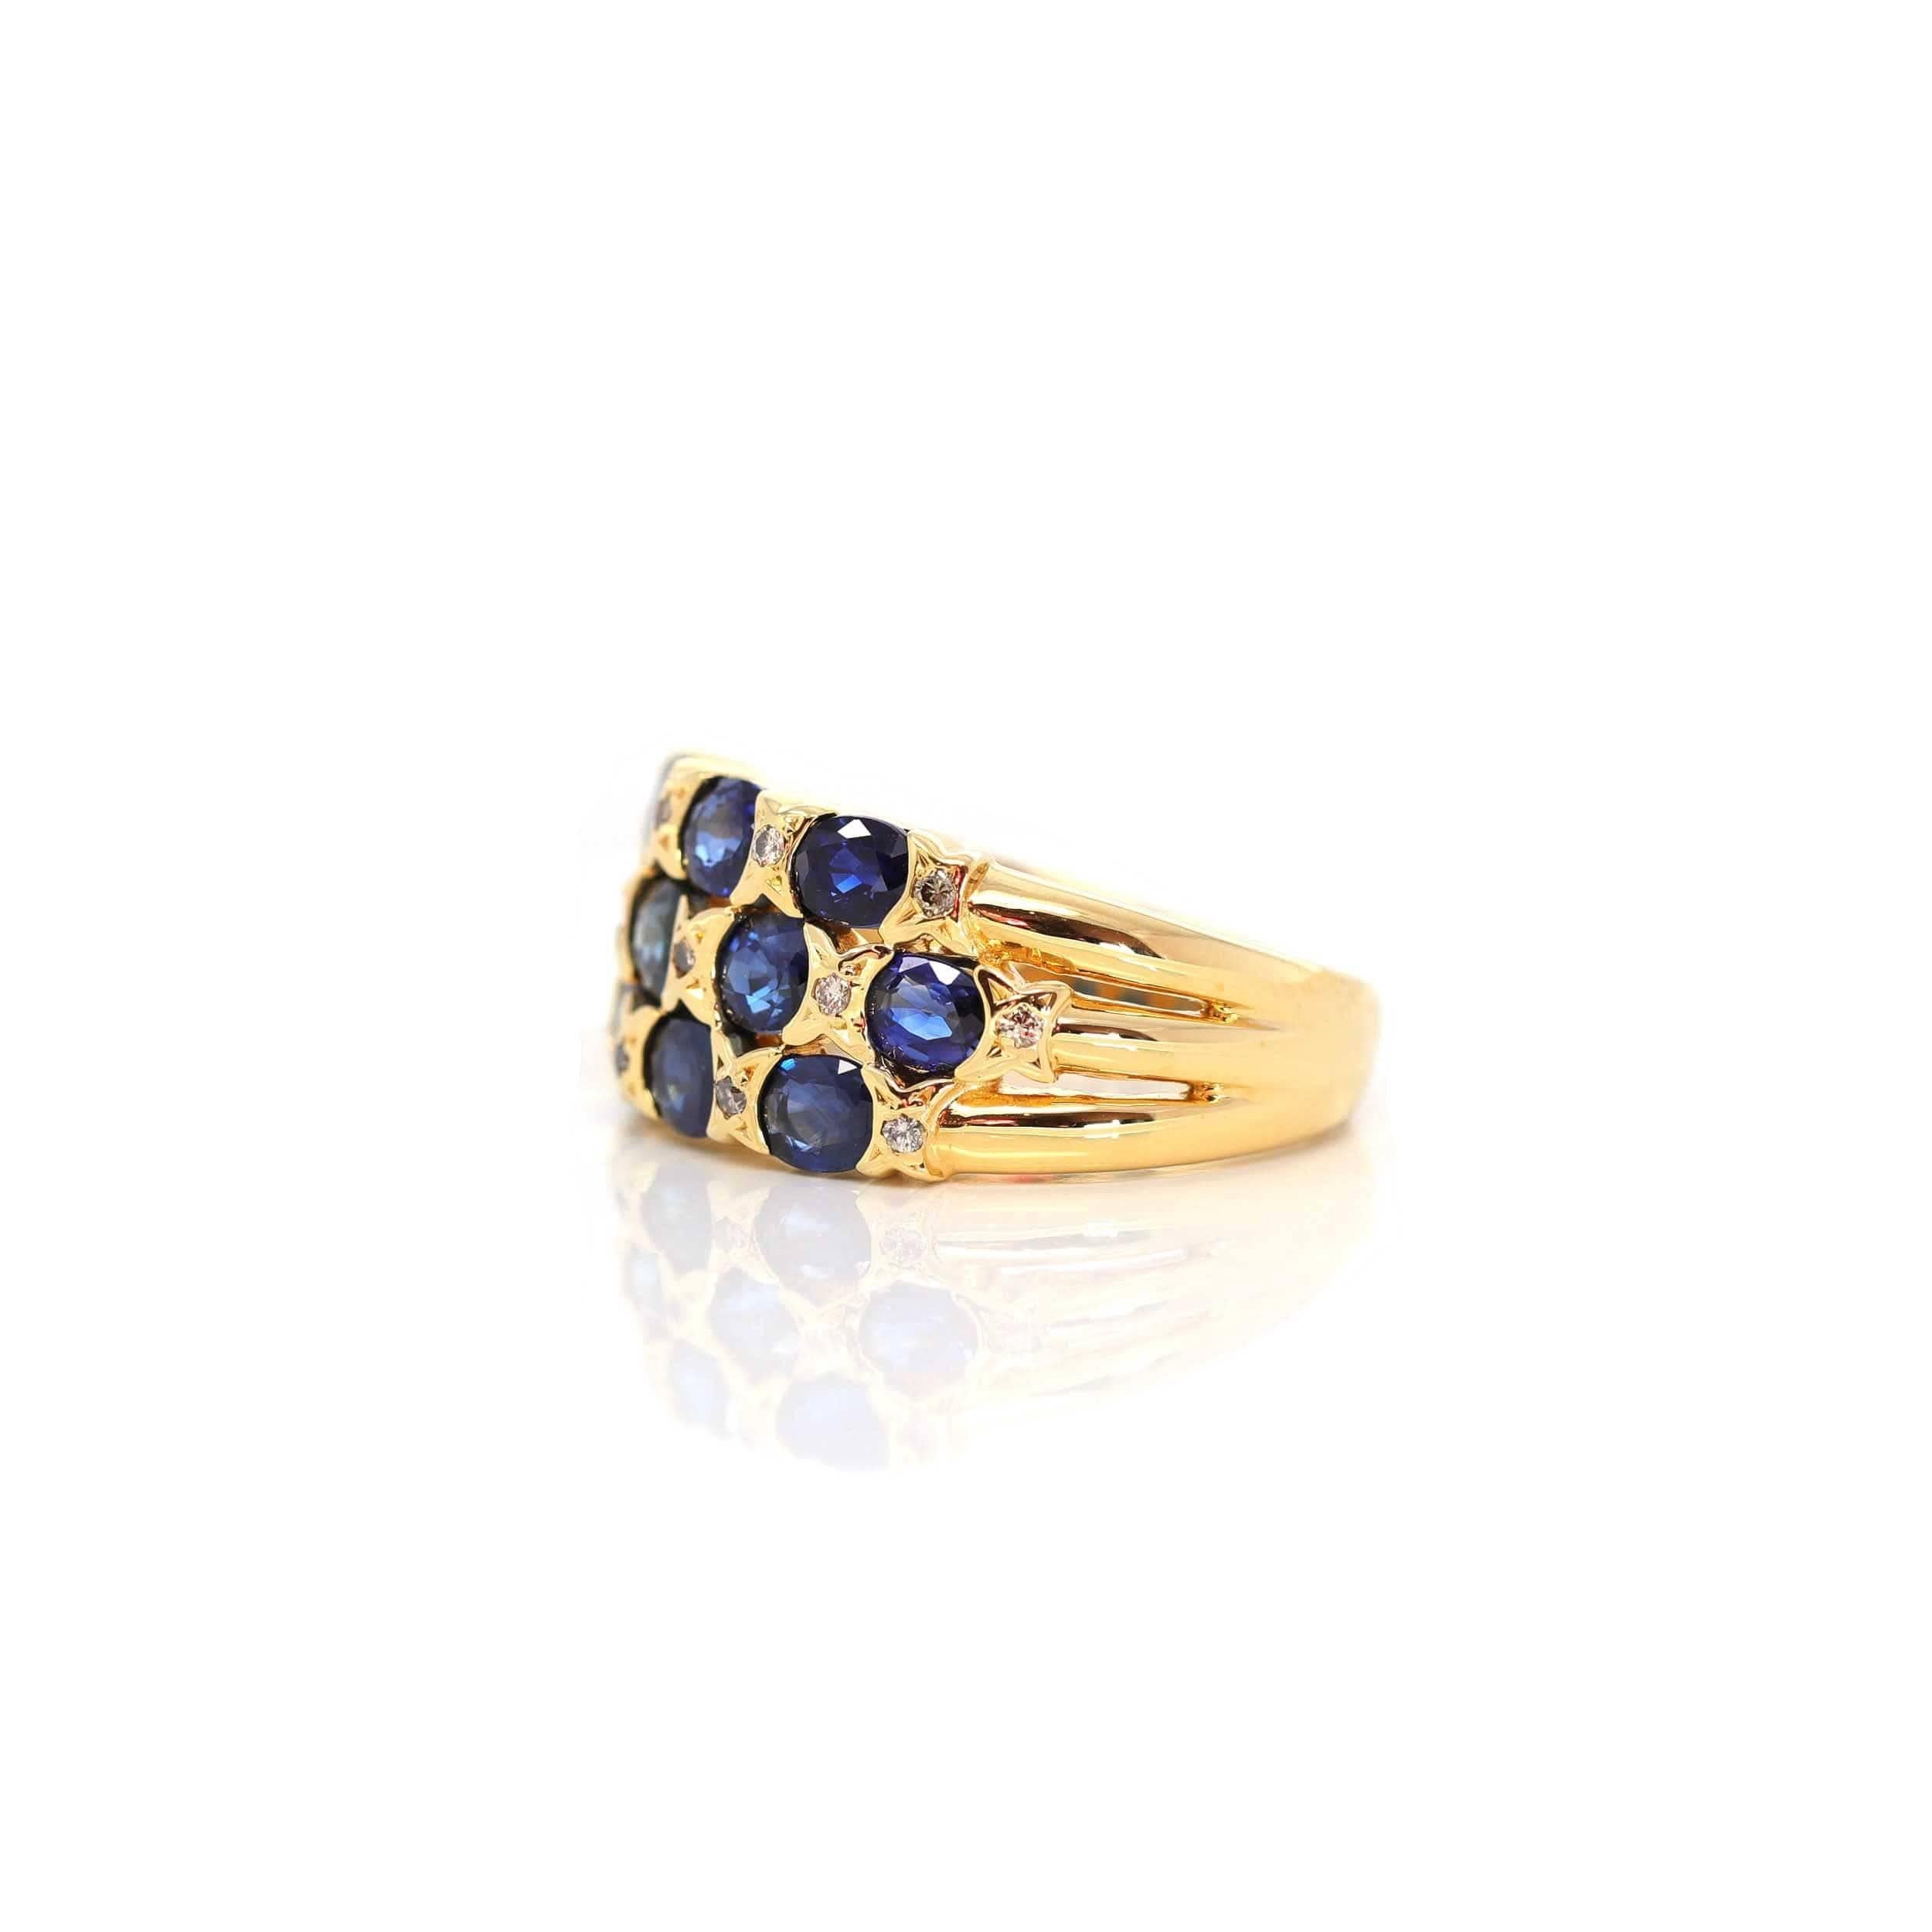 * Design Concept--- This ring features an oval cut Brazillian Blue Sapphire total of 3.5 ct blue sapphire. The design is simplistic yet elegant. The ring looks very exquisite with some diamonds tracing the accents. Baikalla artisans are dedicated to